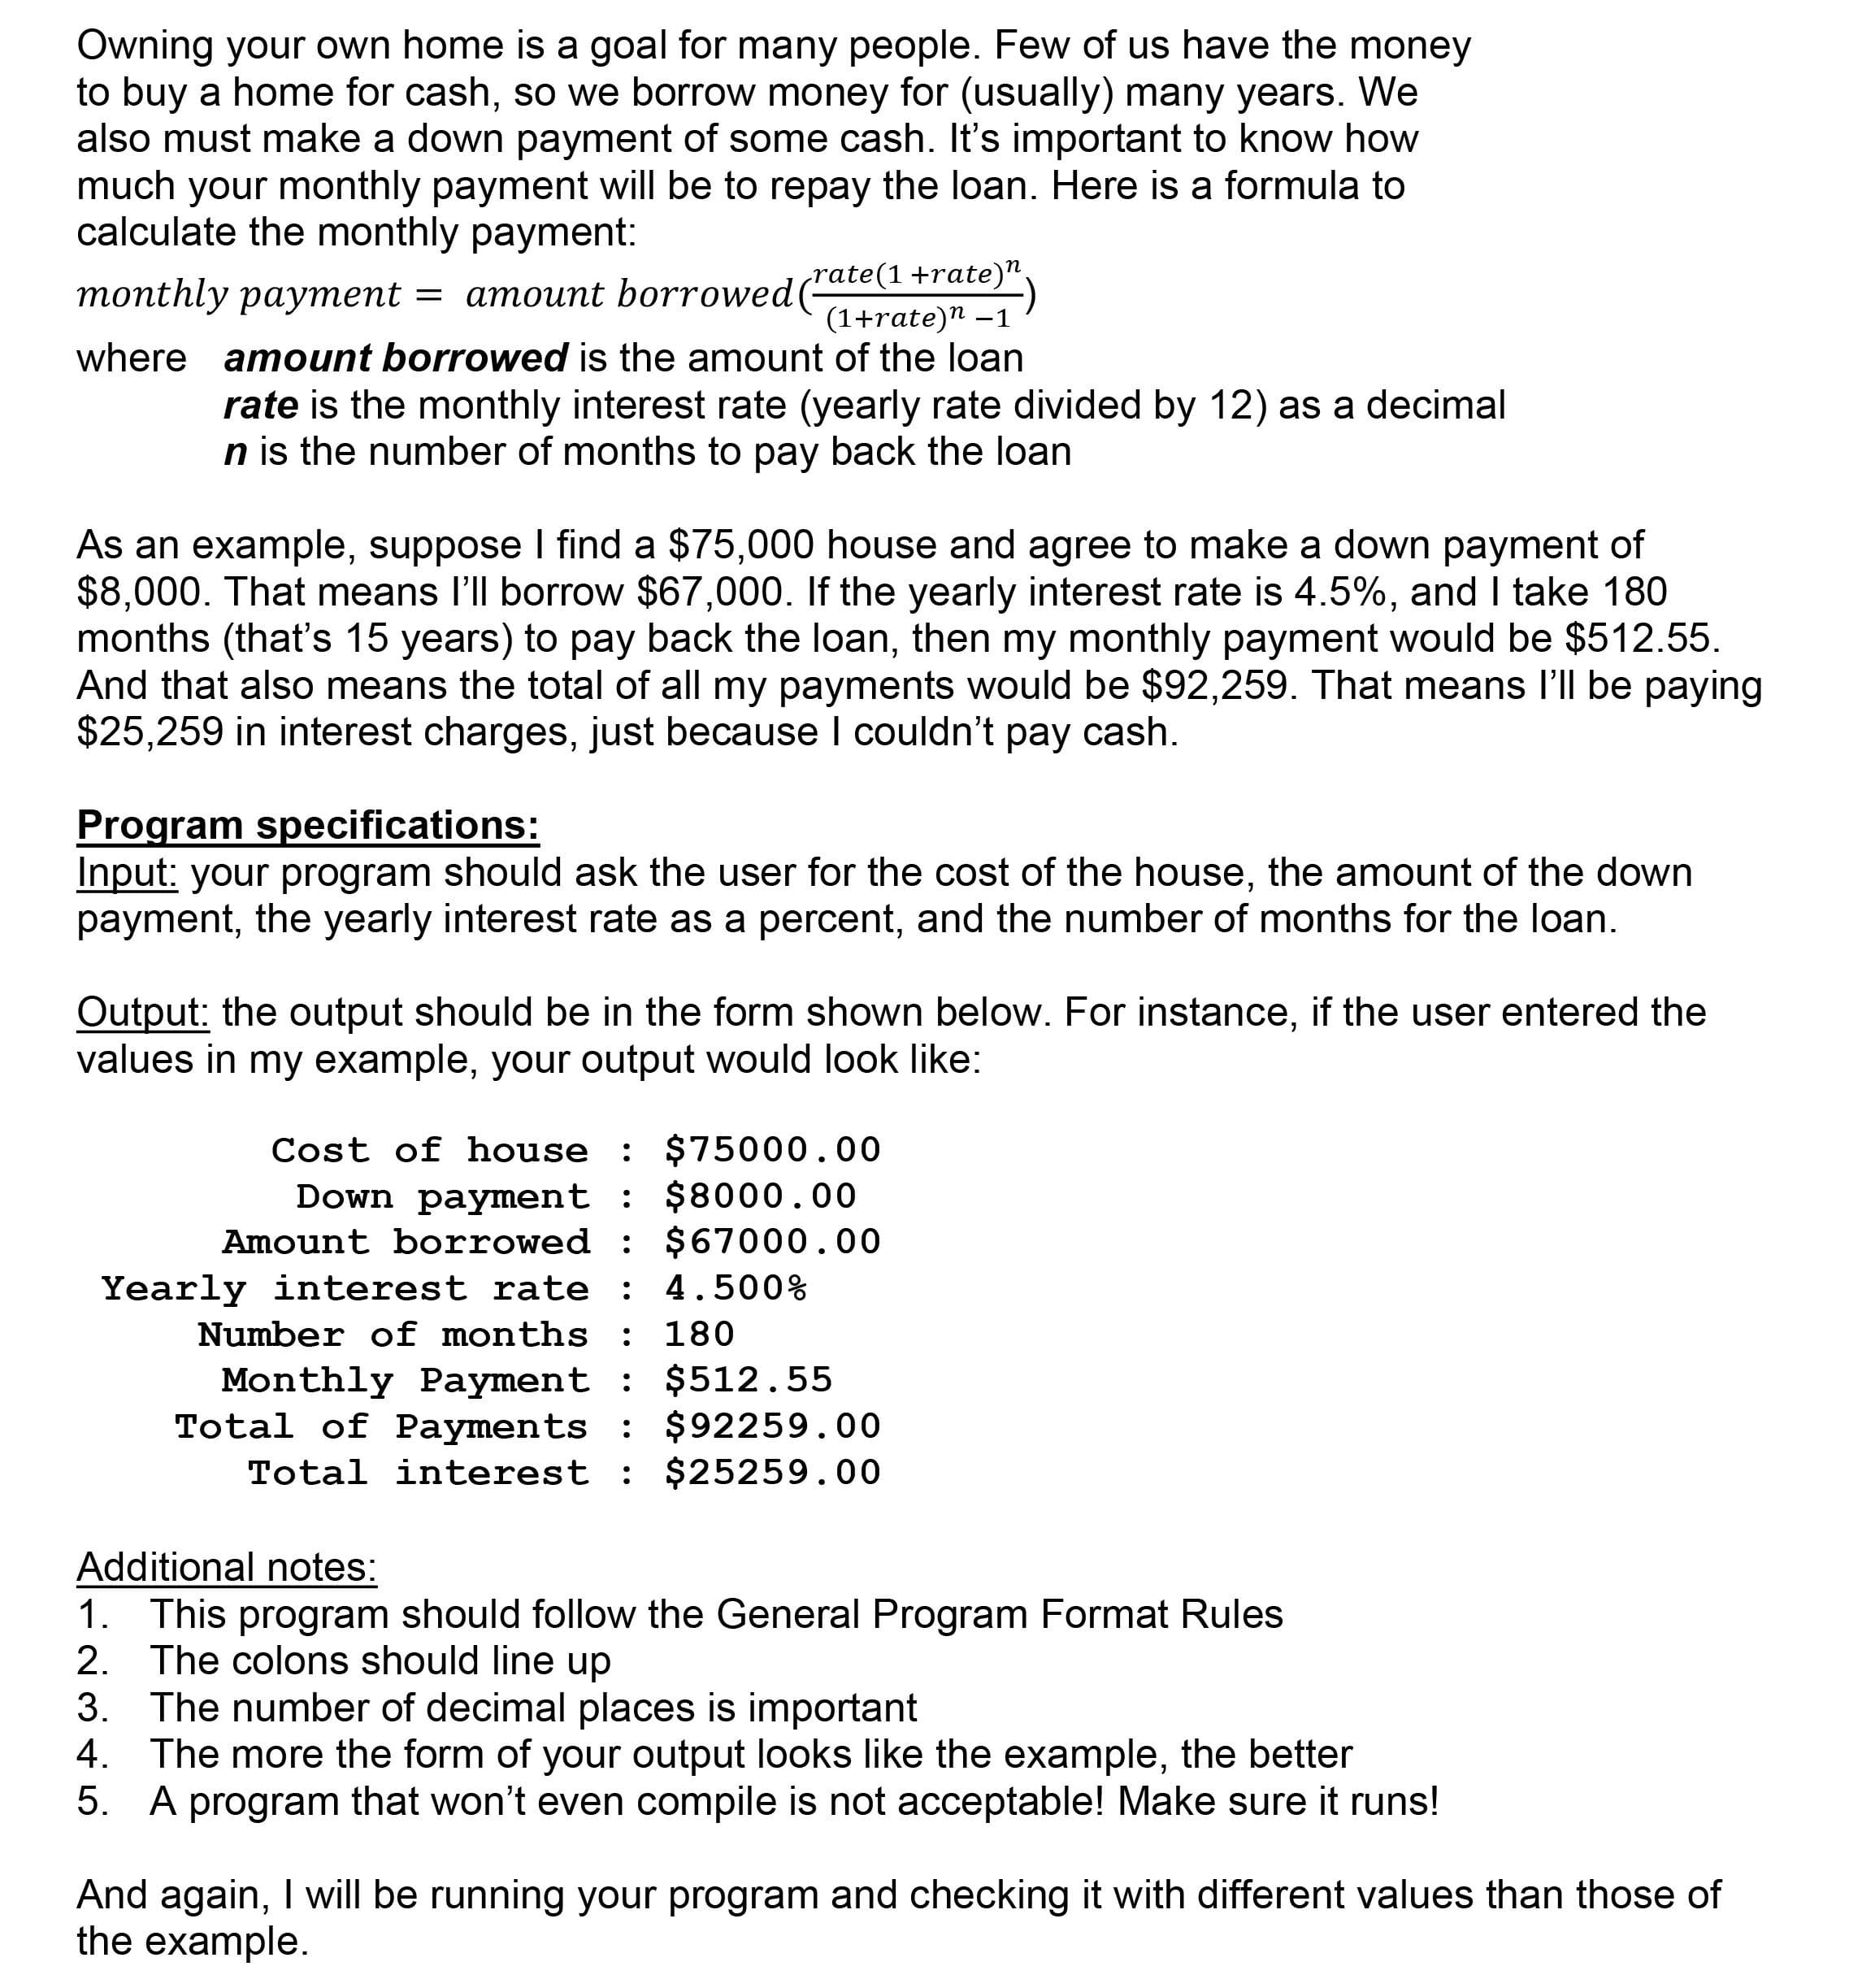 Owning your own home is a goal for many people. Few of us have the money
to buy a home for cash, so we borrow money for (usually) many years. We
also must make a down payment of some cash. It's important to know how
much your monthly payment will be to repay the loan. Here is a formula to
calculate the monthly payment:
rate(1 +rate)".
monthly payment = amount borrowed(
(1+rate)n –1
where amount borrowed is the amount of the loan
rate is the monthly interest rate (yearly rate divided by 12) as a decimal
n is the number of months to pay back the loan
As an example, suppose I find a $75,000 house and agree to make a down payment of
$8,000. That means l'll borrow $67,000. If the yearly interest rate is 4.5%, and I take 180
months (that's 15 years) to pay back the loan, then my monthly payment would be $512.55.
And that also means the total of all my payments would be $92,259. That means l'll be paying
$25,259 in interest charges, just because I couldn't pay cash.
Program specifications:
Input: your program should ask the user for the cost of the house, the amount of the down
payment, the yearly interest rate as a percent, and the number of months for the loan.
Output: the output should be in the form shown below. For instance, if the user entered the
values in my example, your output would look like:
Cost of house : $75000.00
Down payment : $8000.00
Amount borrowed : $67000.00
Yearly interest rate : 4.500%
Number of months :
Monthly Payment : $512.55
Total of Payments : $92259.00
Total interest : $25259.00
Additional notes:
1. This program should follow the General Program Format Rules
2. The colons should line up
3. The number of decimal places is important
4. The more the form of your output looks like the example, the better
5. A program that won't even compile is not acceptable! Make sure it runs!
And again, I will be running your program and checking it with different values than those of
the example.
